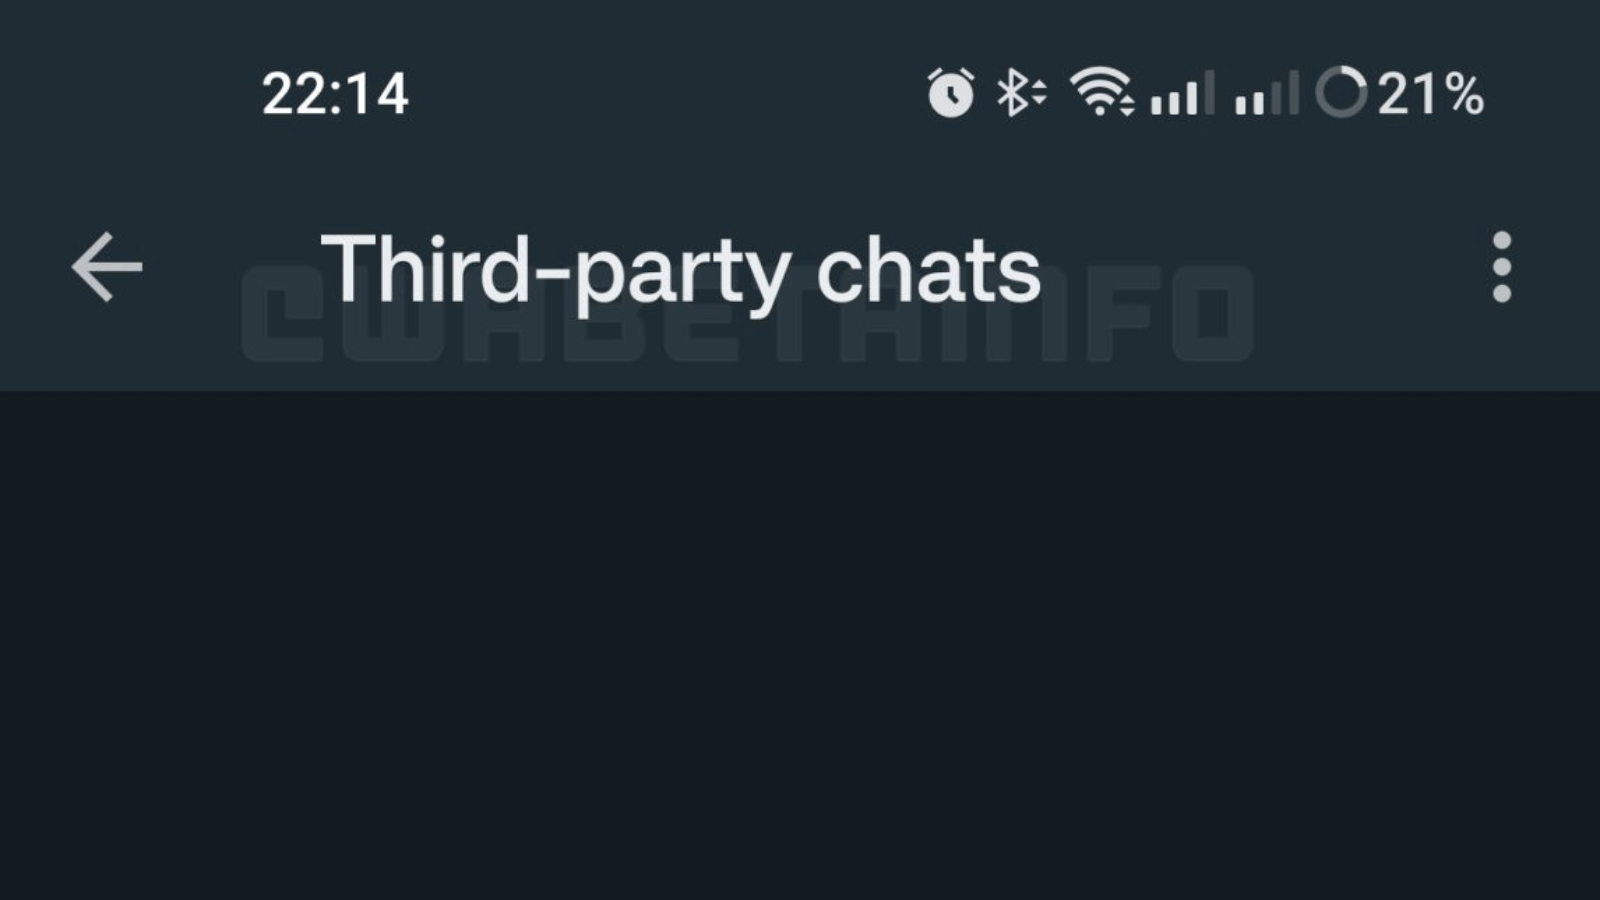 WhatsApp thirdd-party chats 